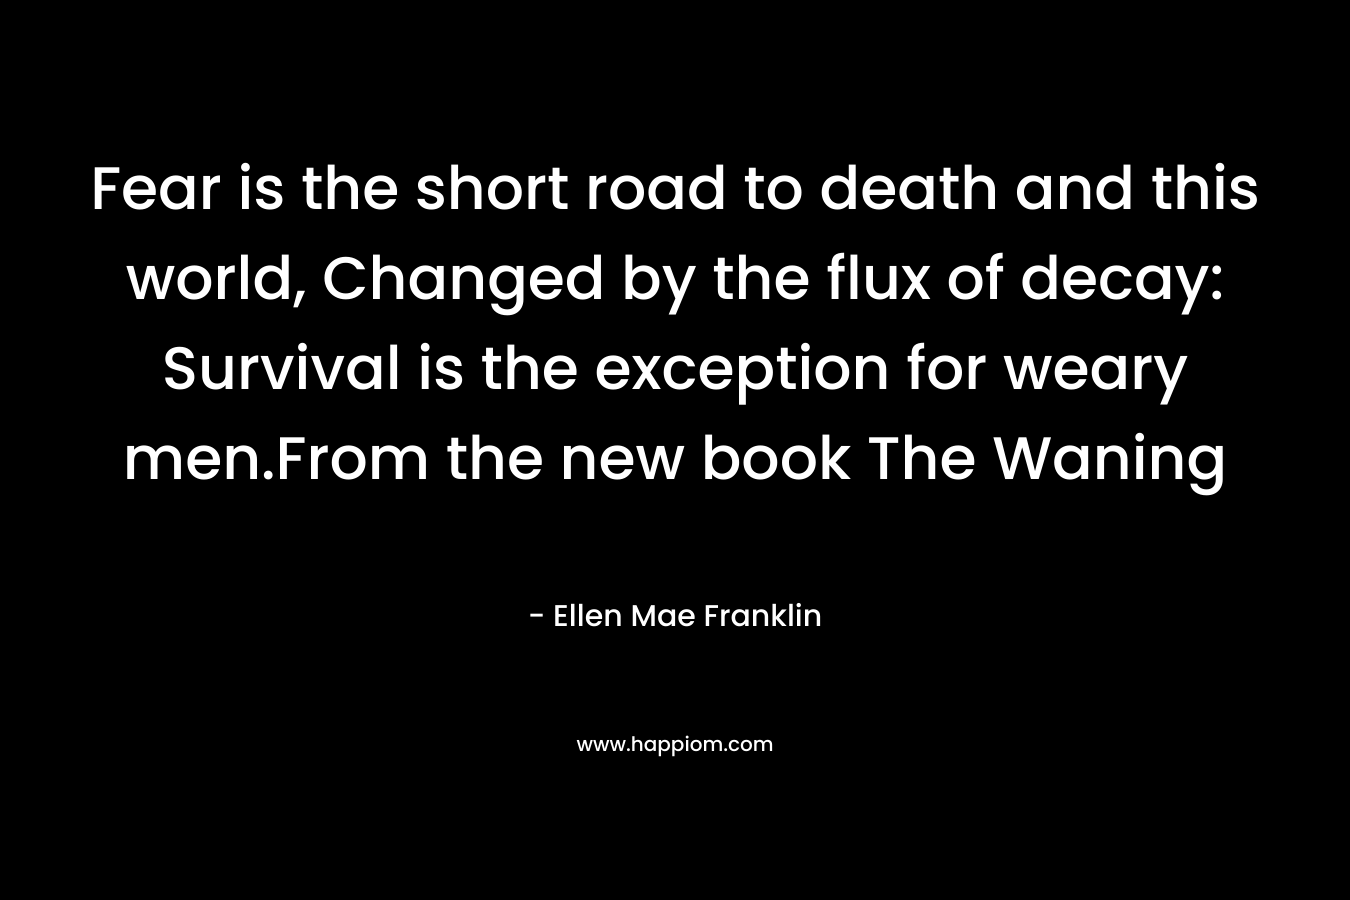 Fear is the short road to death and this world, Changed by the flux of decay: Survival is the exception for weary men.From the new book The Waning